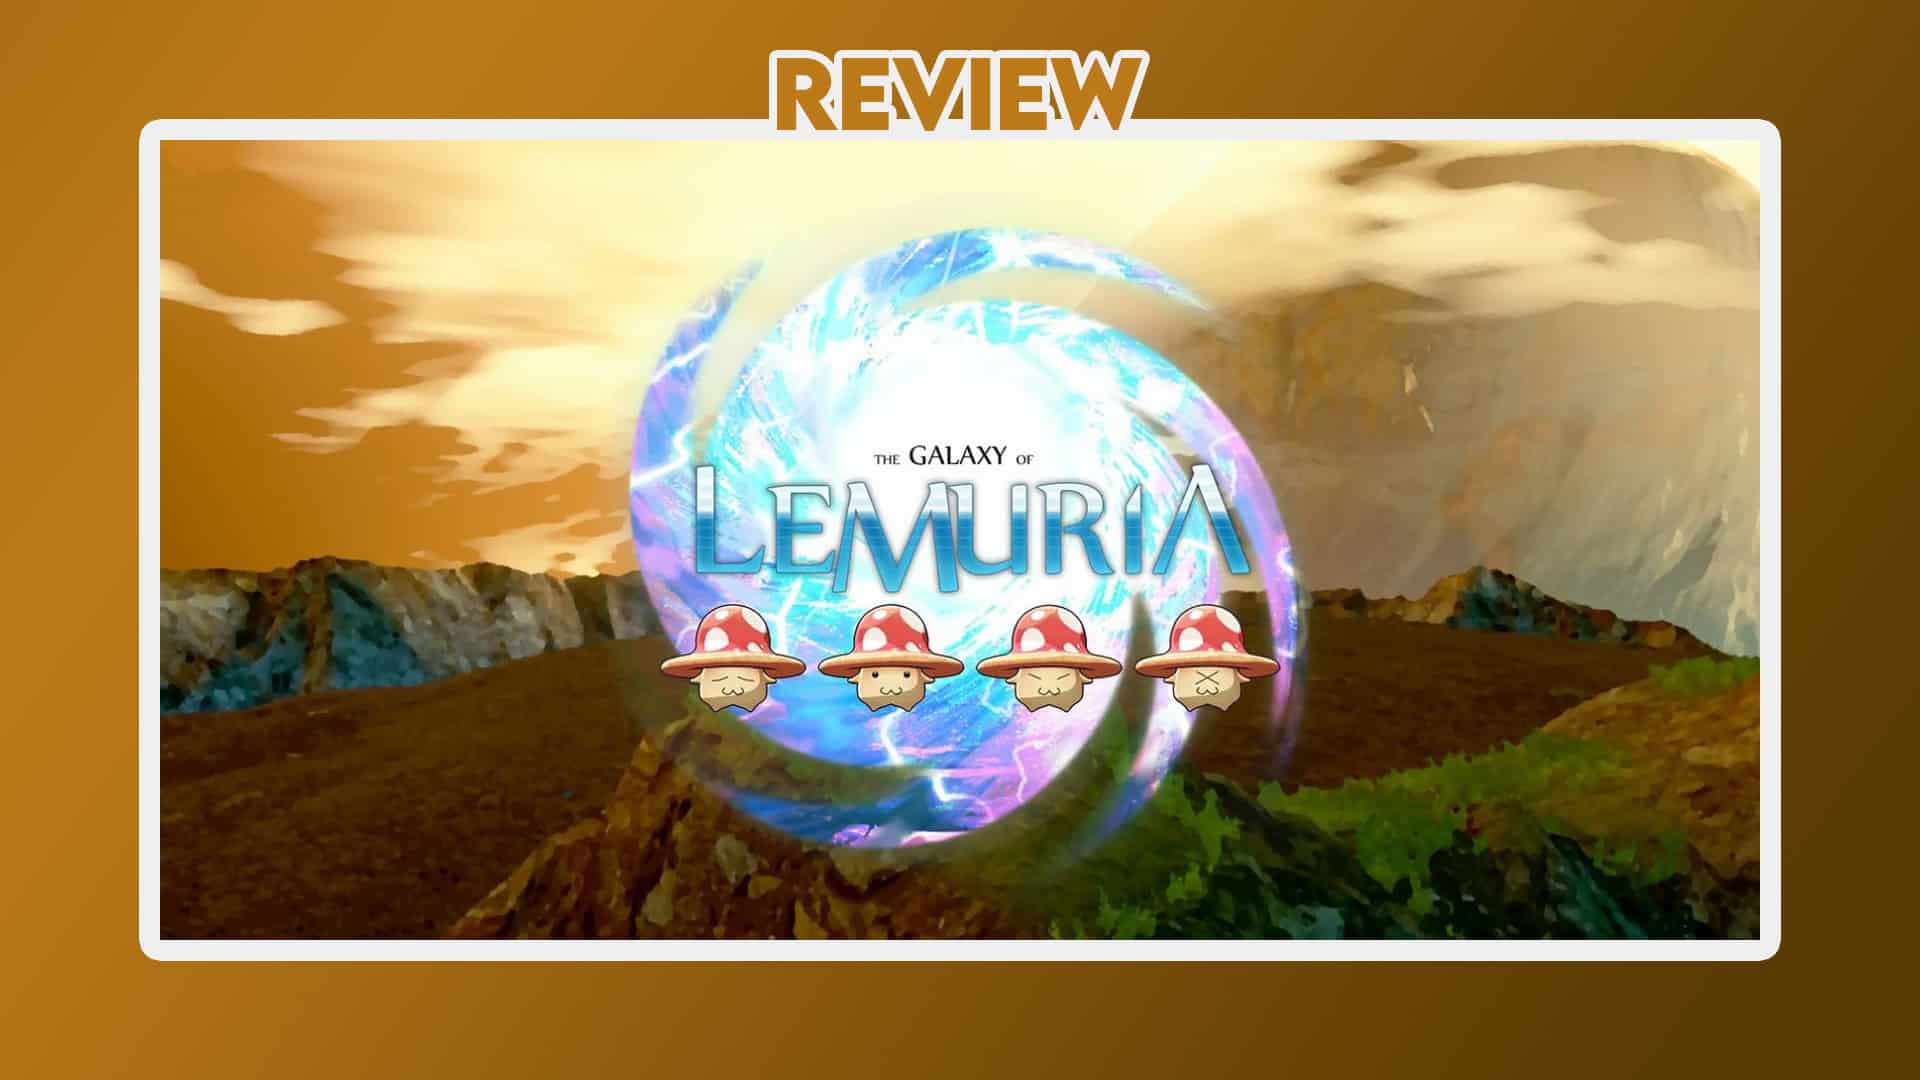 The Galaxy of lemuria review play to earn nft game Thank you for reading our The Galaxy of Lemuria Review, you can connect with the game by visiting the official website.